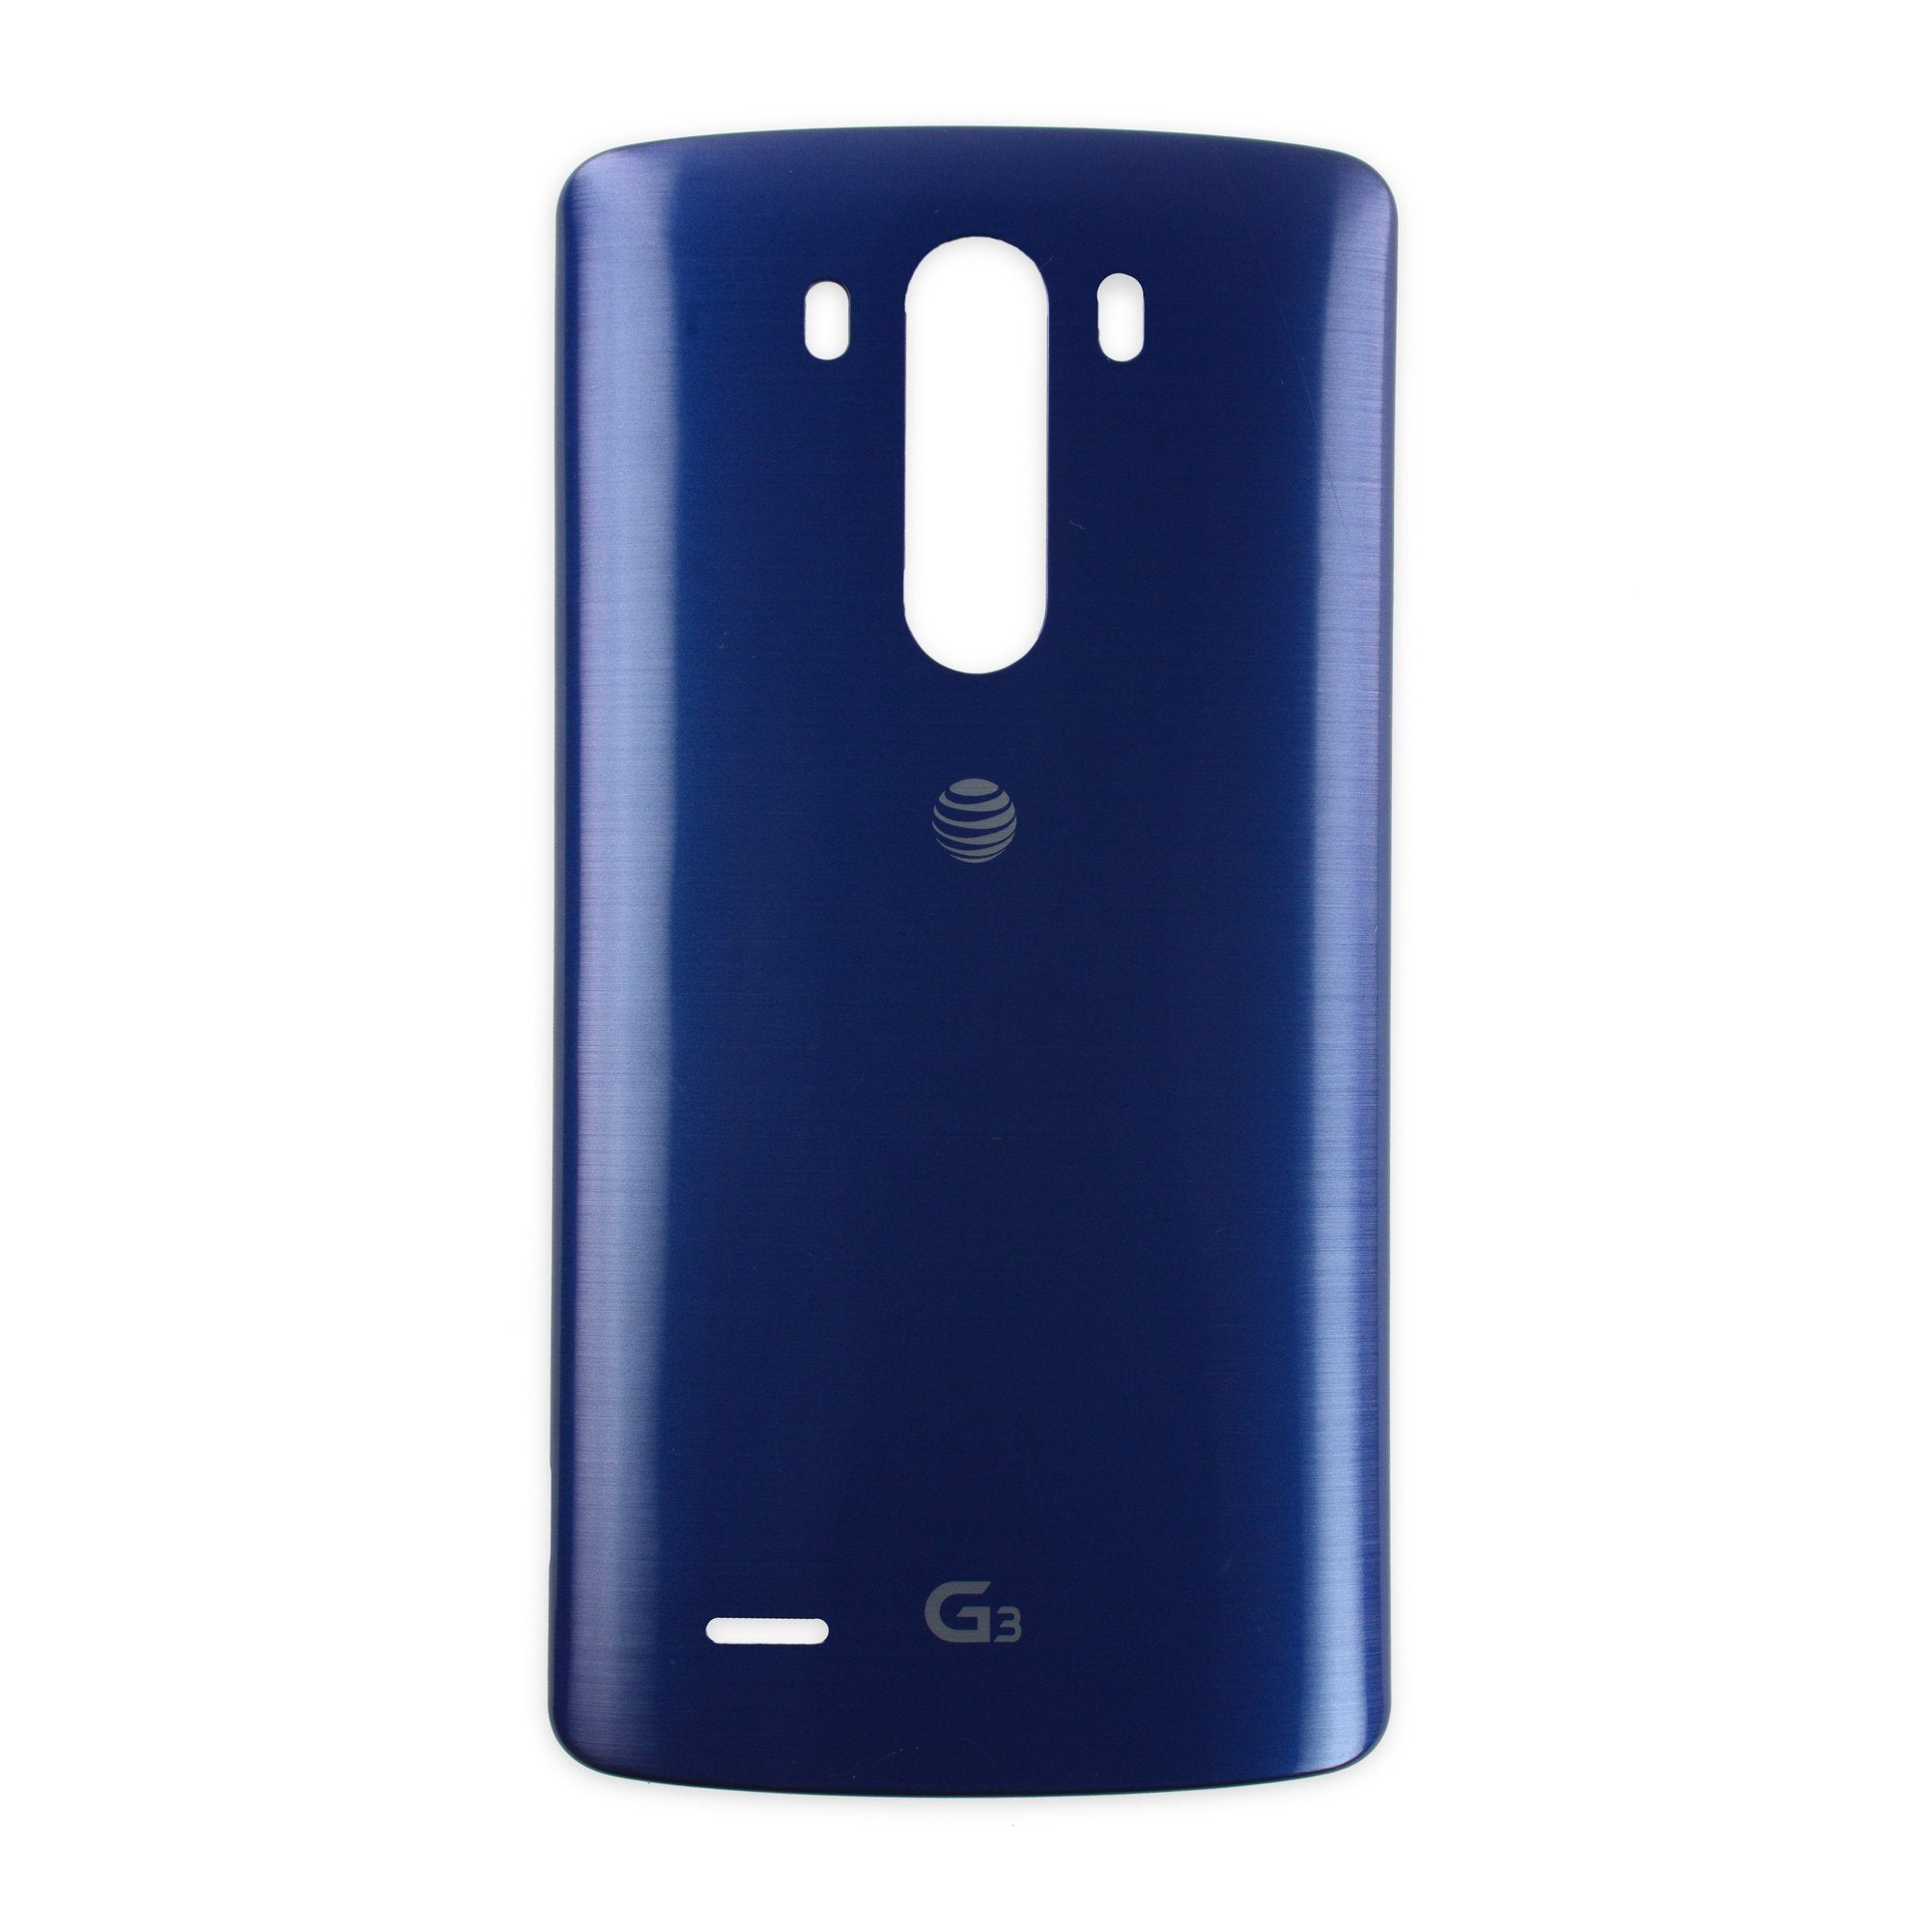 LG G3 Rear Panel (AT&T) Blue Used, A-Stock